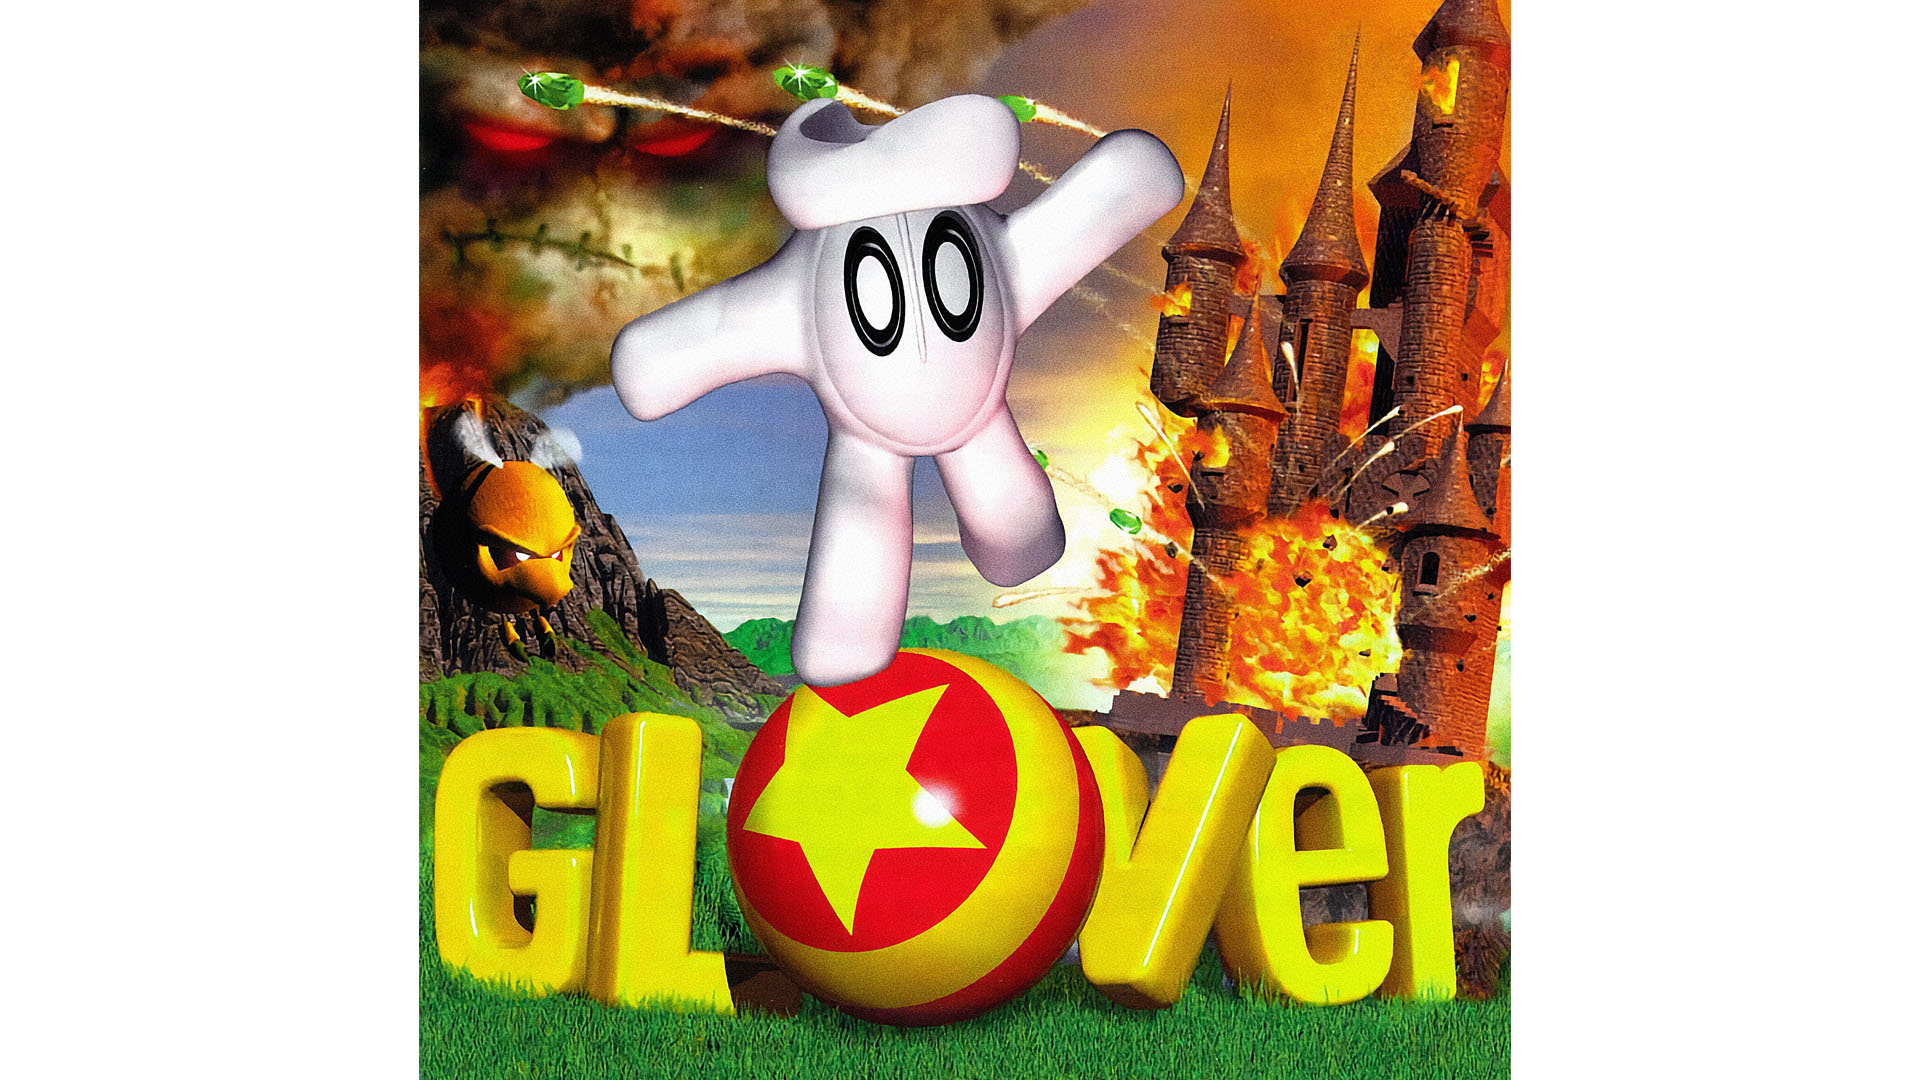 Glover is coming to Steam